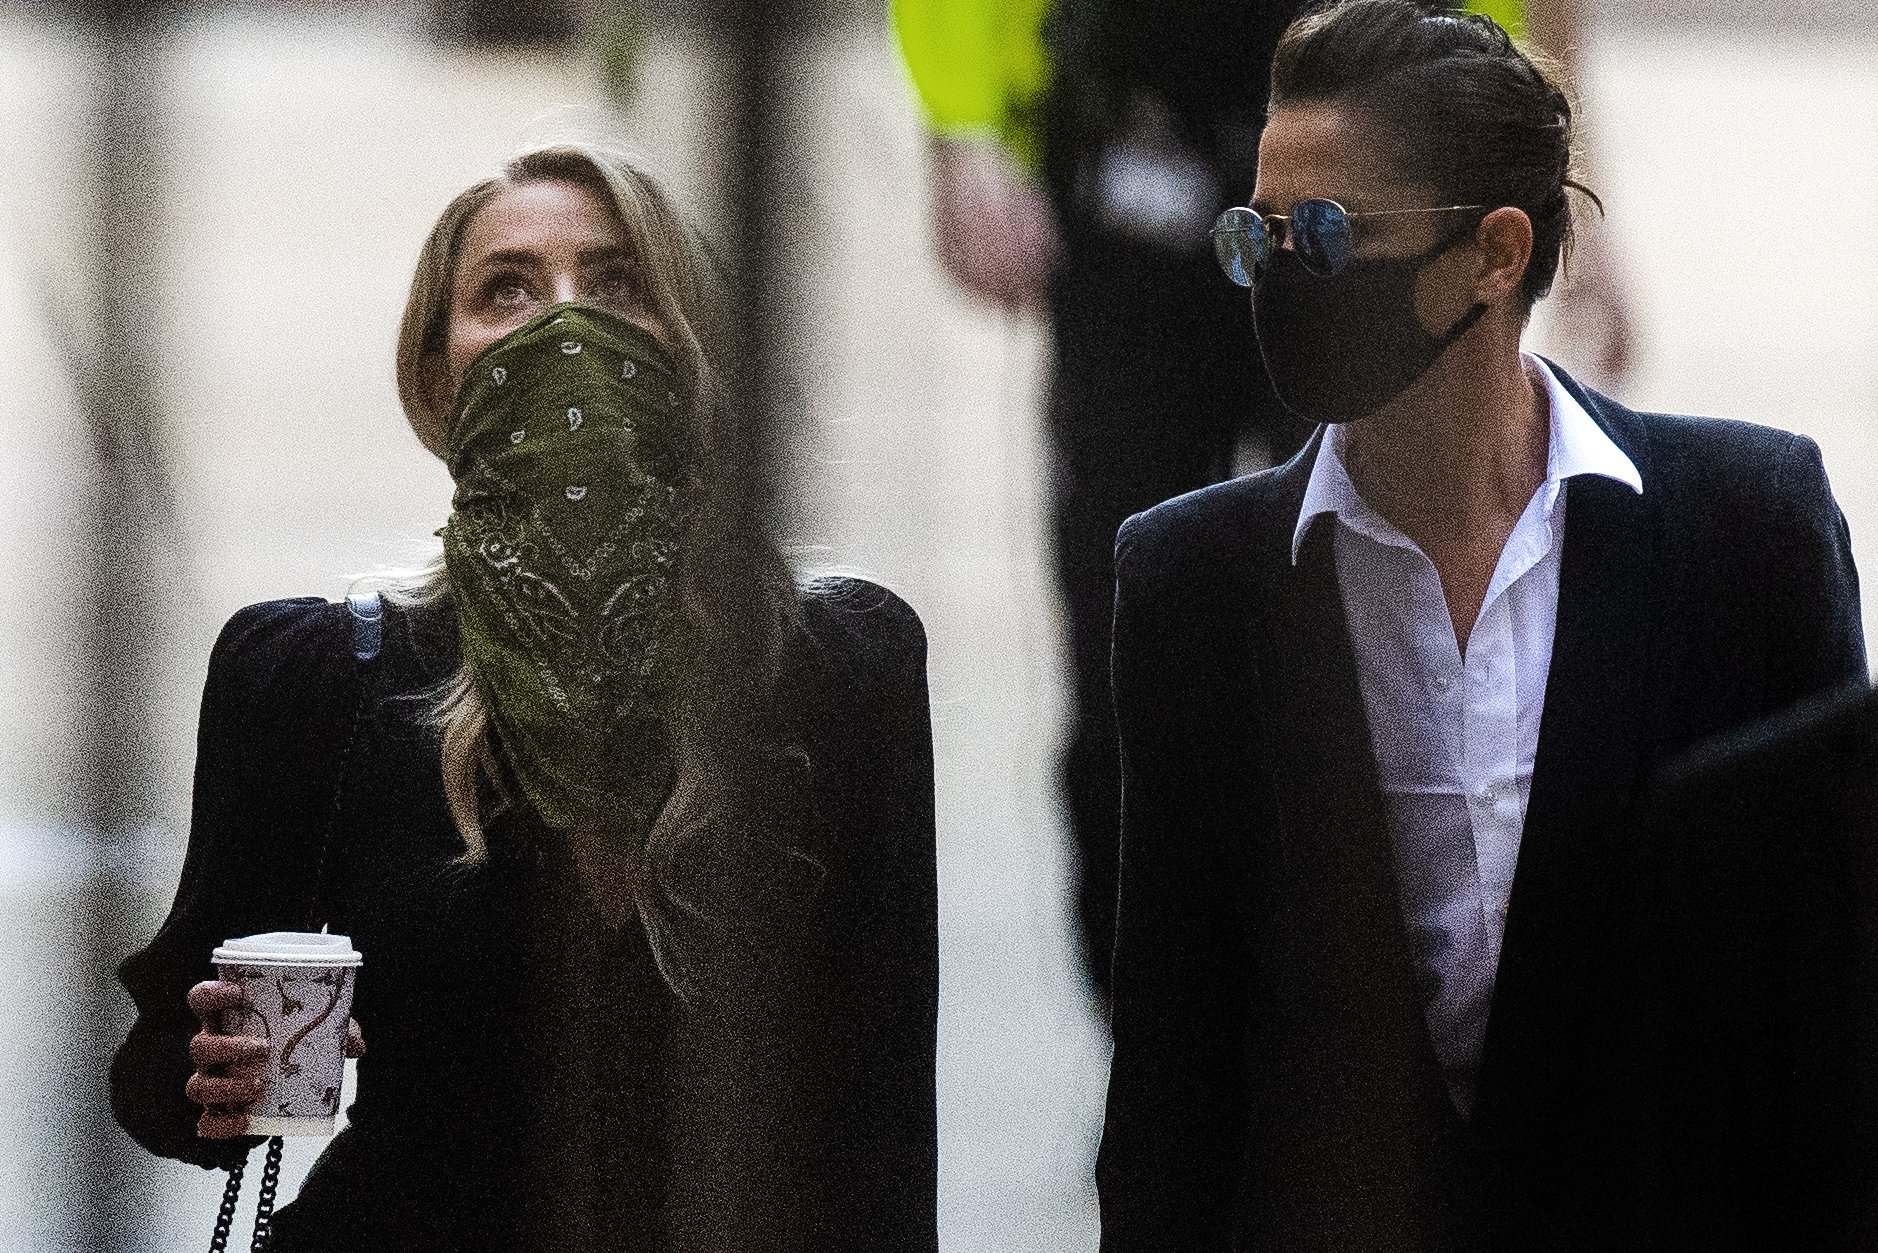 Bianca Butti and ex-girlfriend, Amber Heard, photographed arriving at the High Court in London Johnny Depp's libel case hearing against the publishers of The Sun | Source: Getty Images